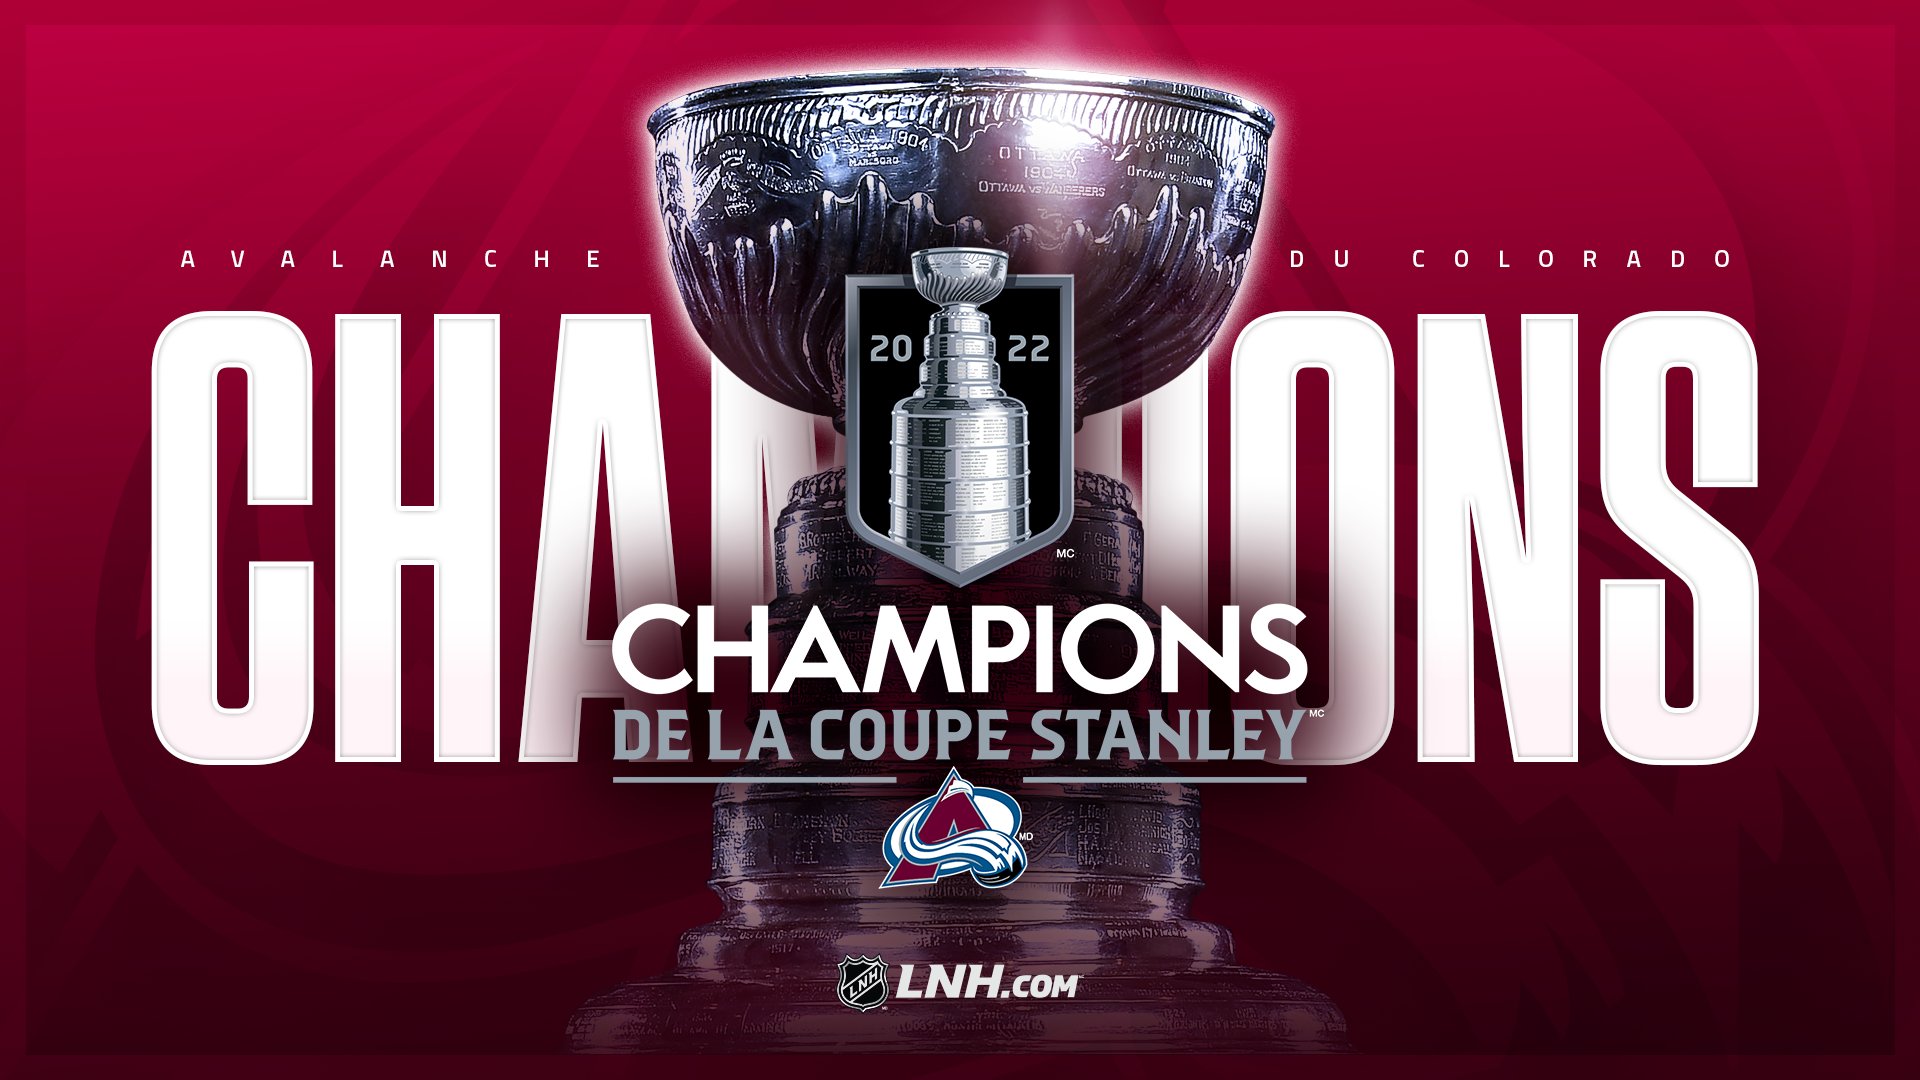 General 1920x1080 NHL Hockey Colorado Avalanche Stanley Cup French logo trophy